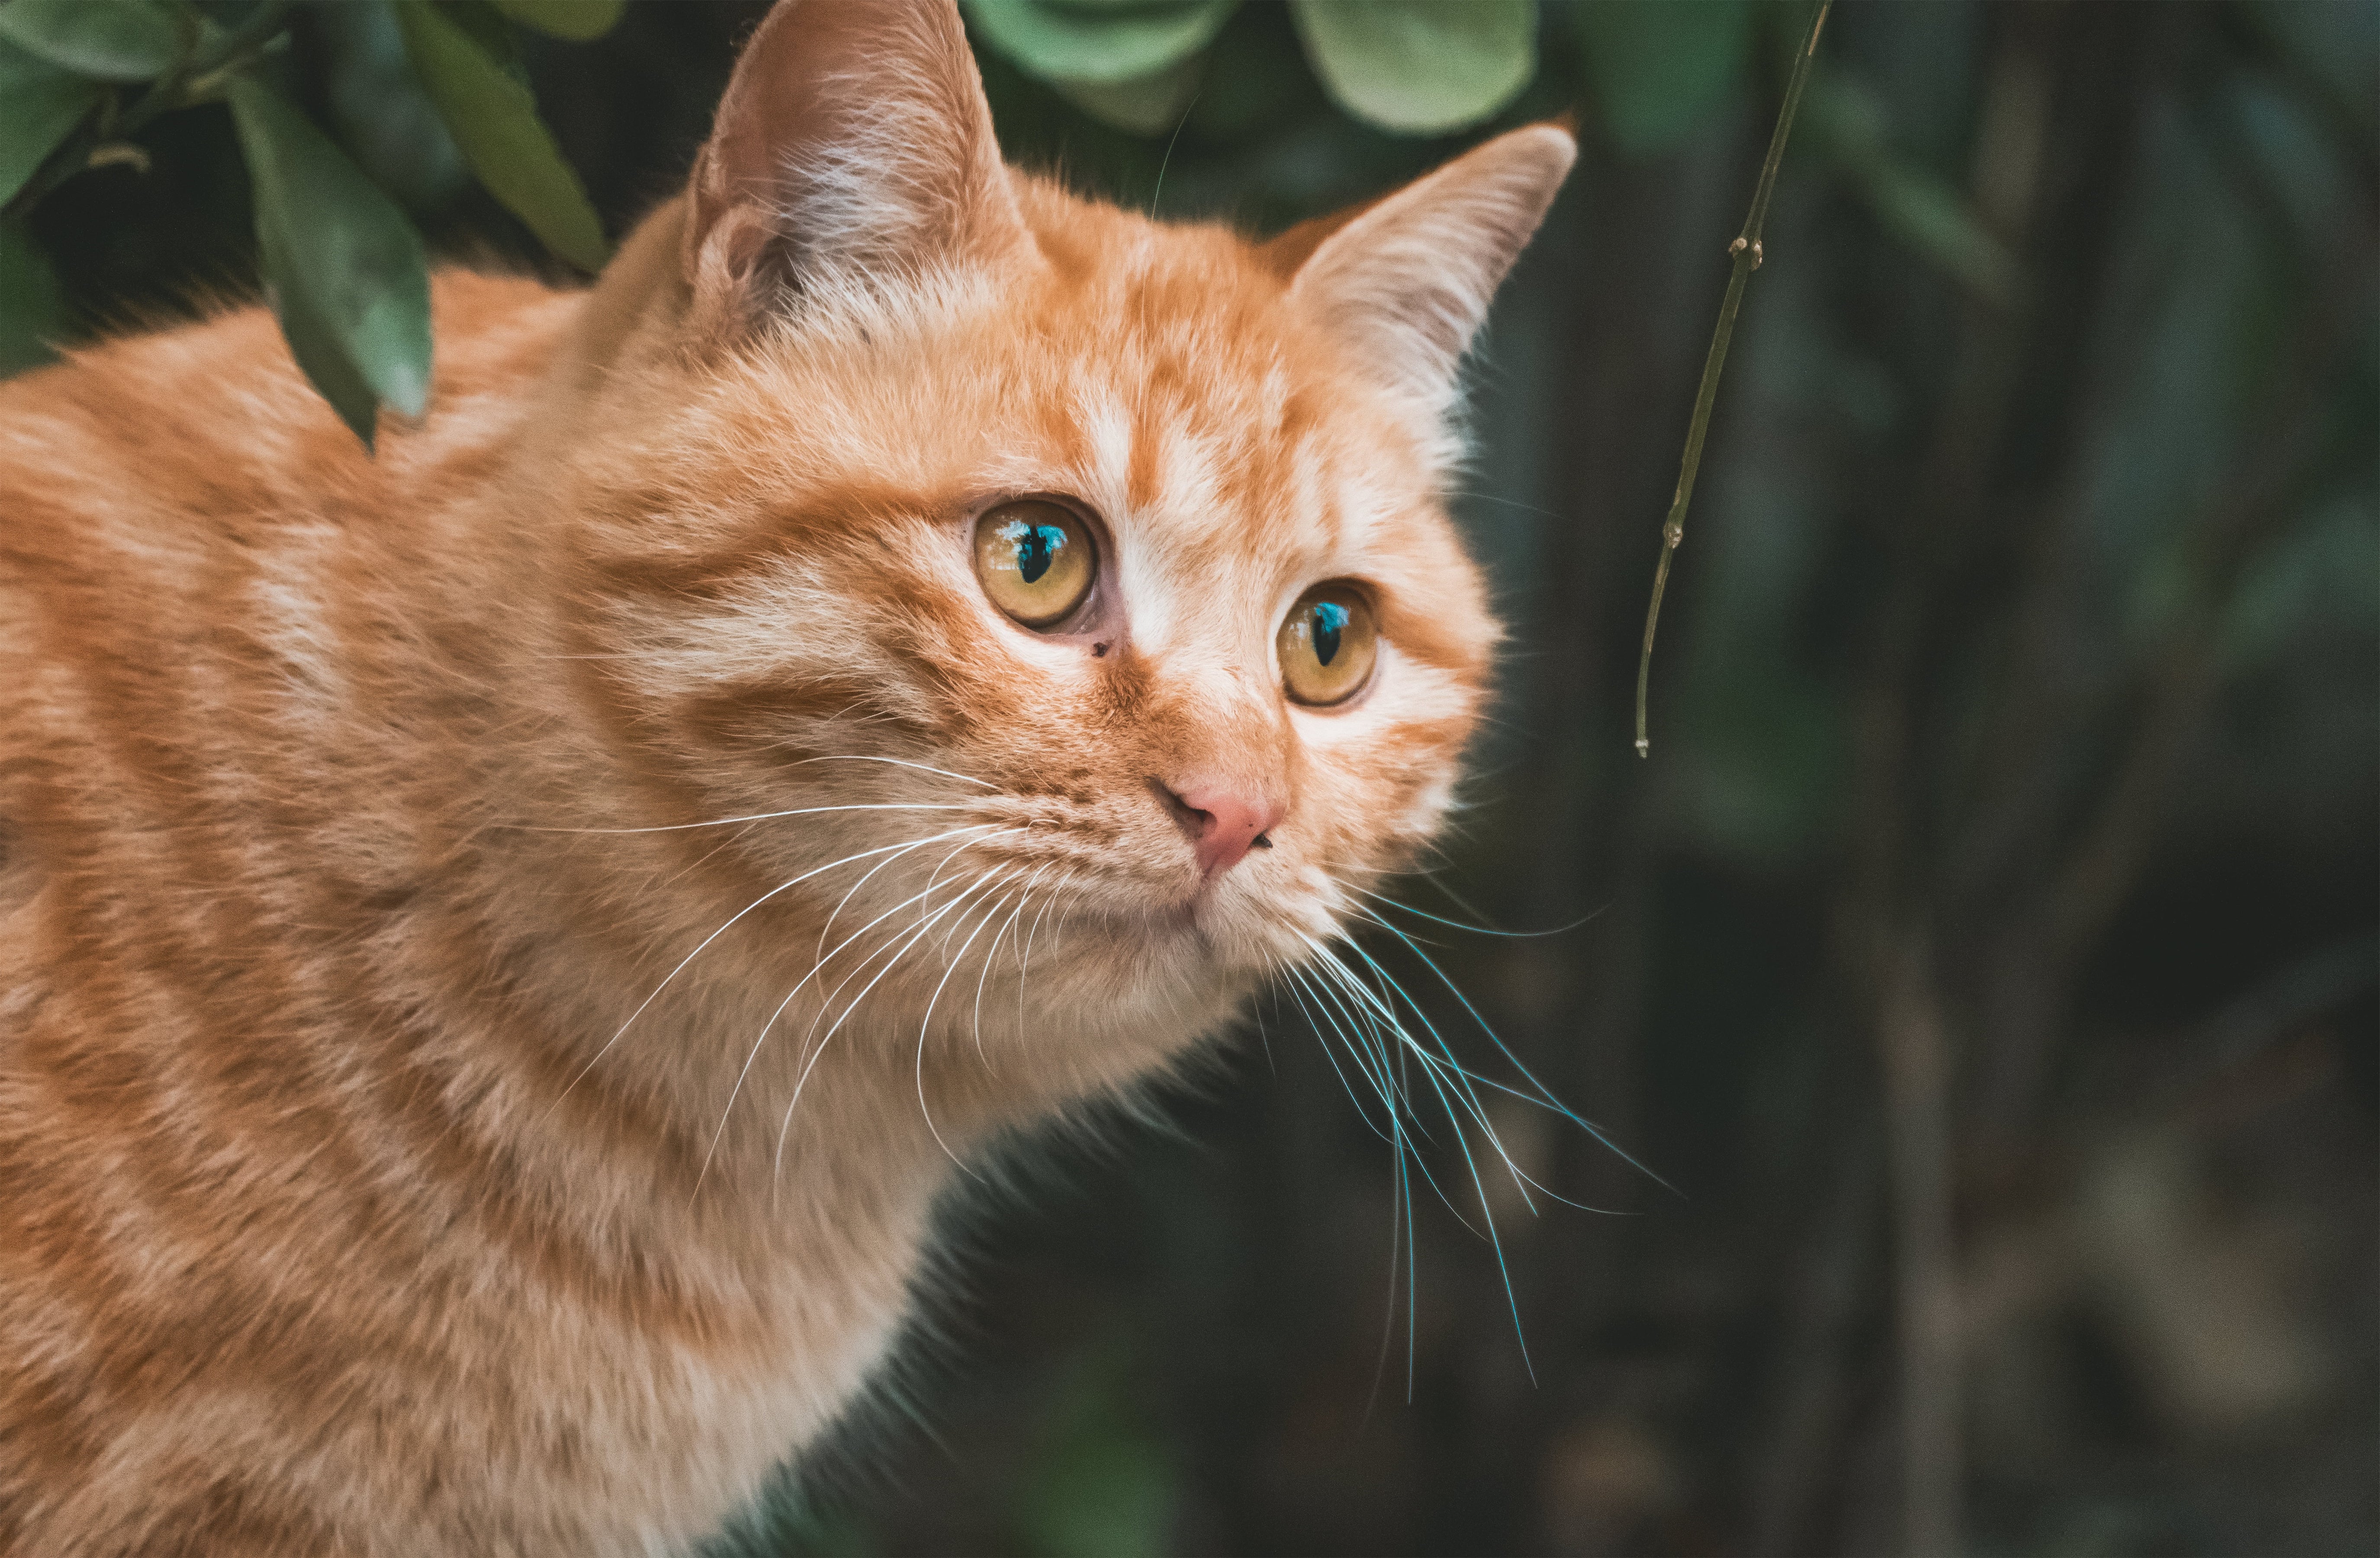 Allowing Your Cat Outside: Precautions and Benefits